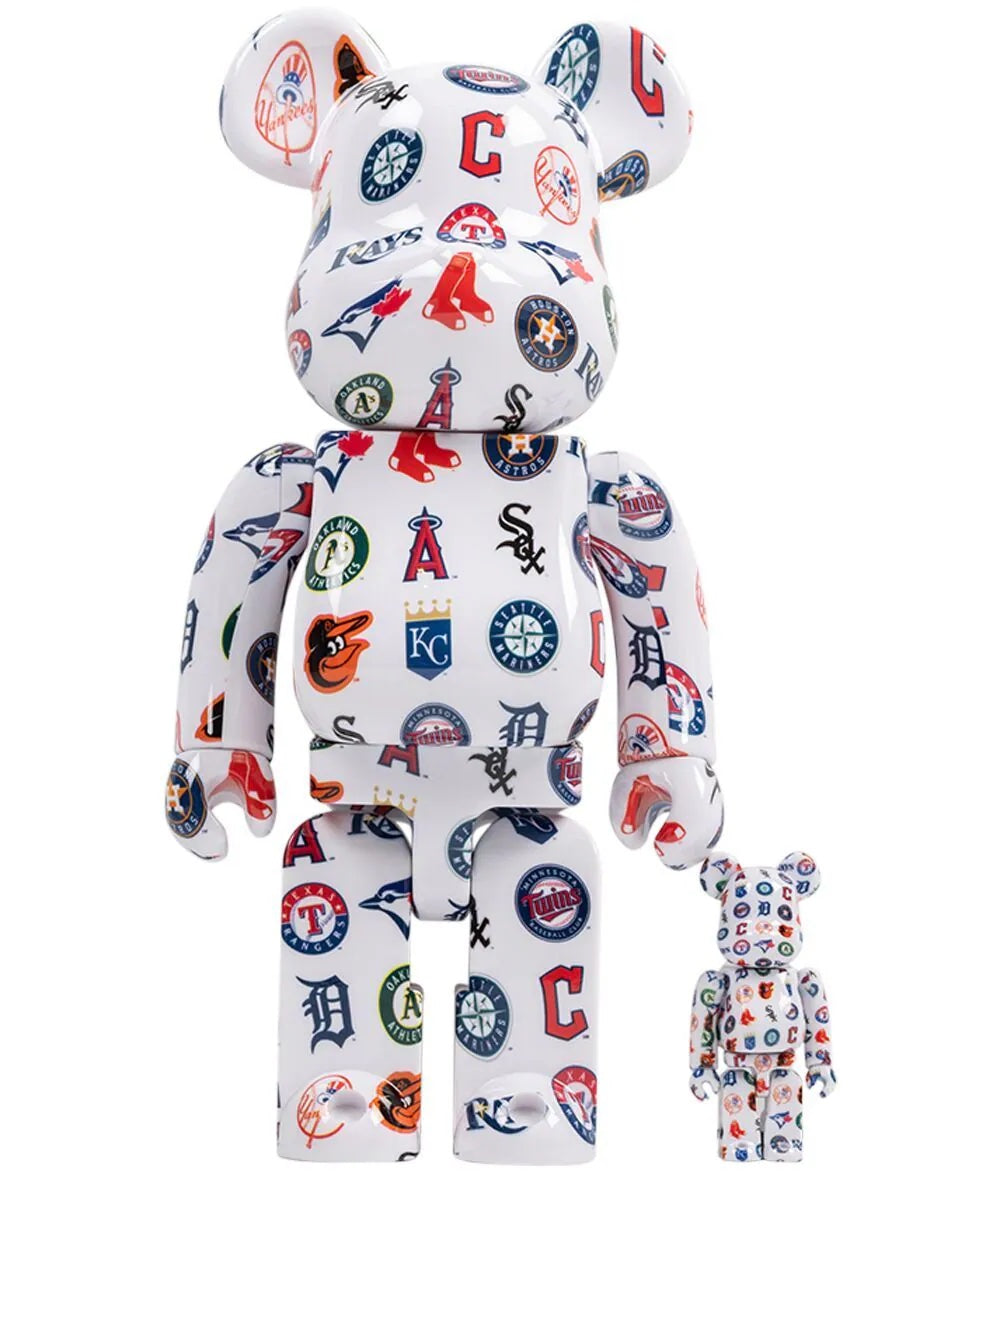 Limited Edition BE@RBRICK Bearbrick MLB American League